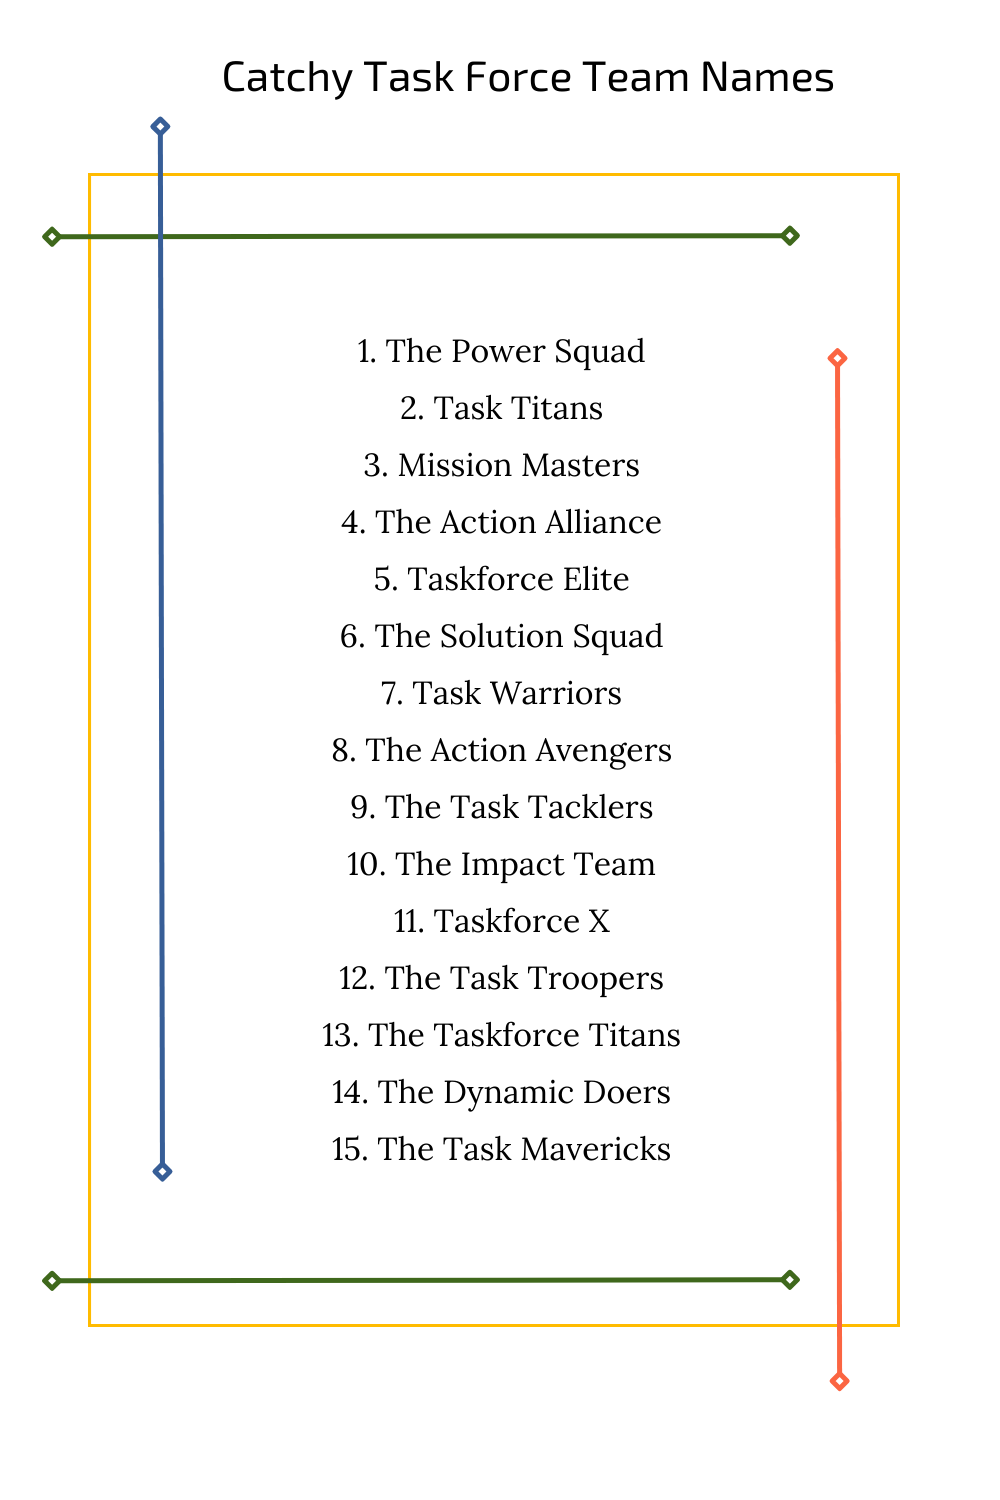 Catchy Task Force Team Names